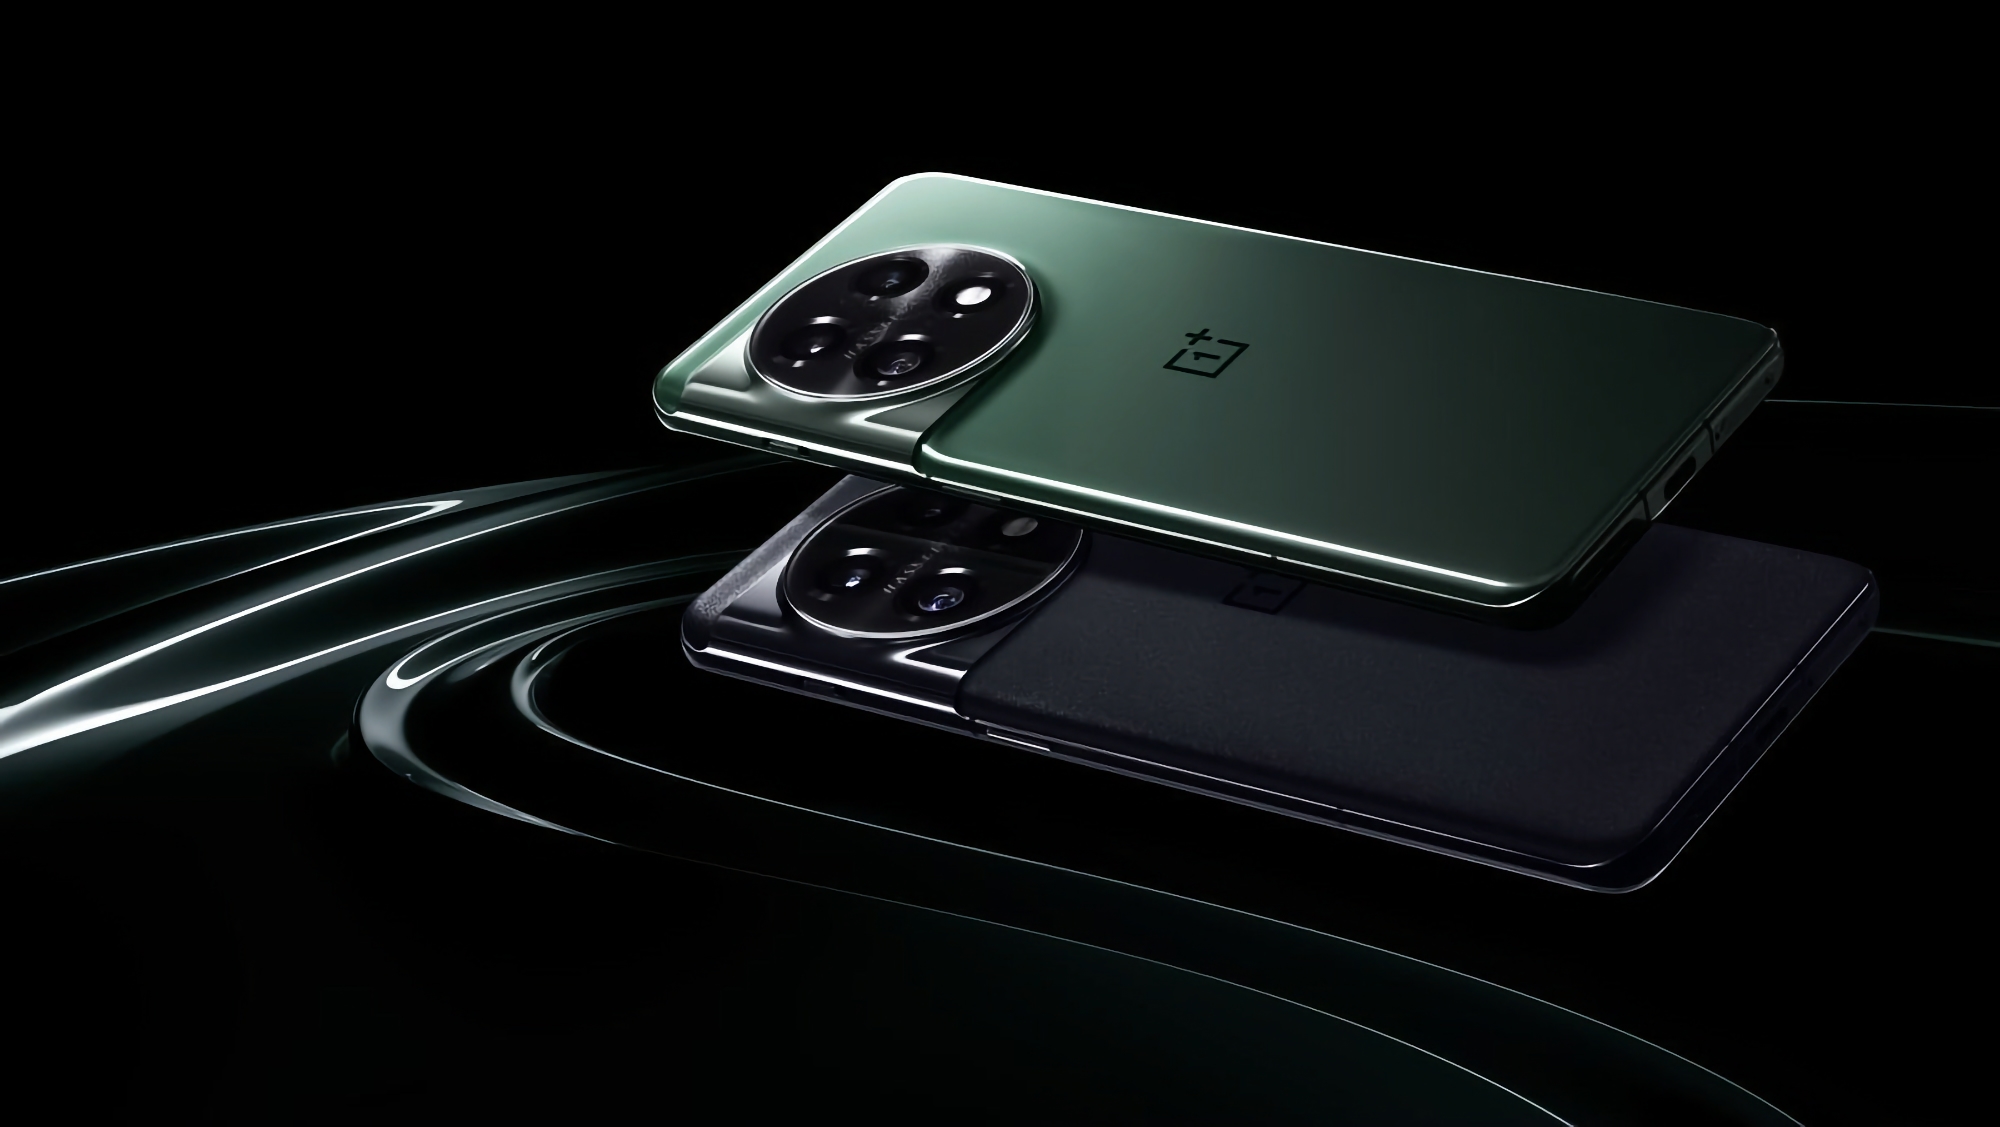 Unexpectedly: OnePlus 11R 5G with Snapdragon 8+ Gen 1 chip and 120 Hz screen will be introduced along with OnePlus 11 and OnePlus Buds Pro 2